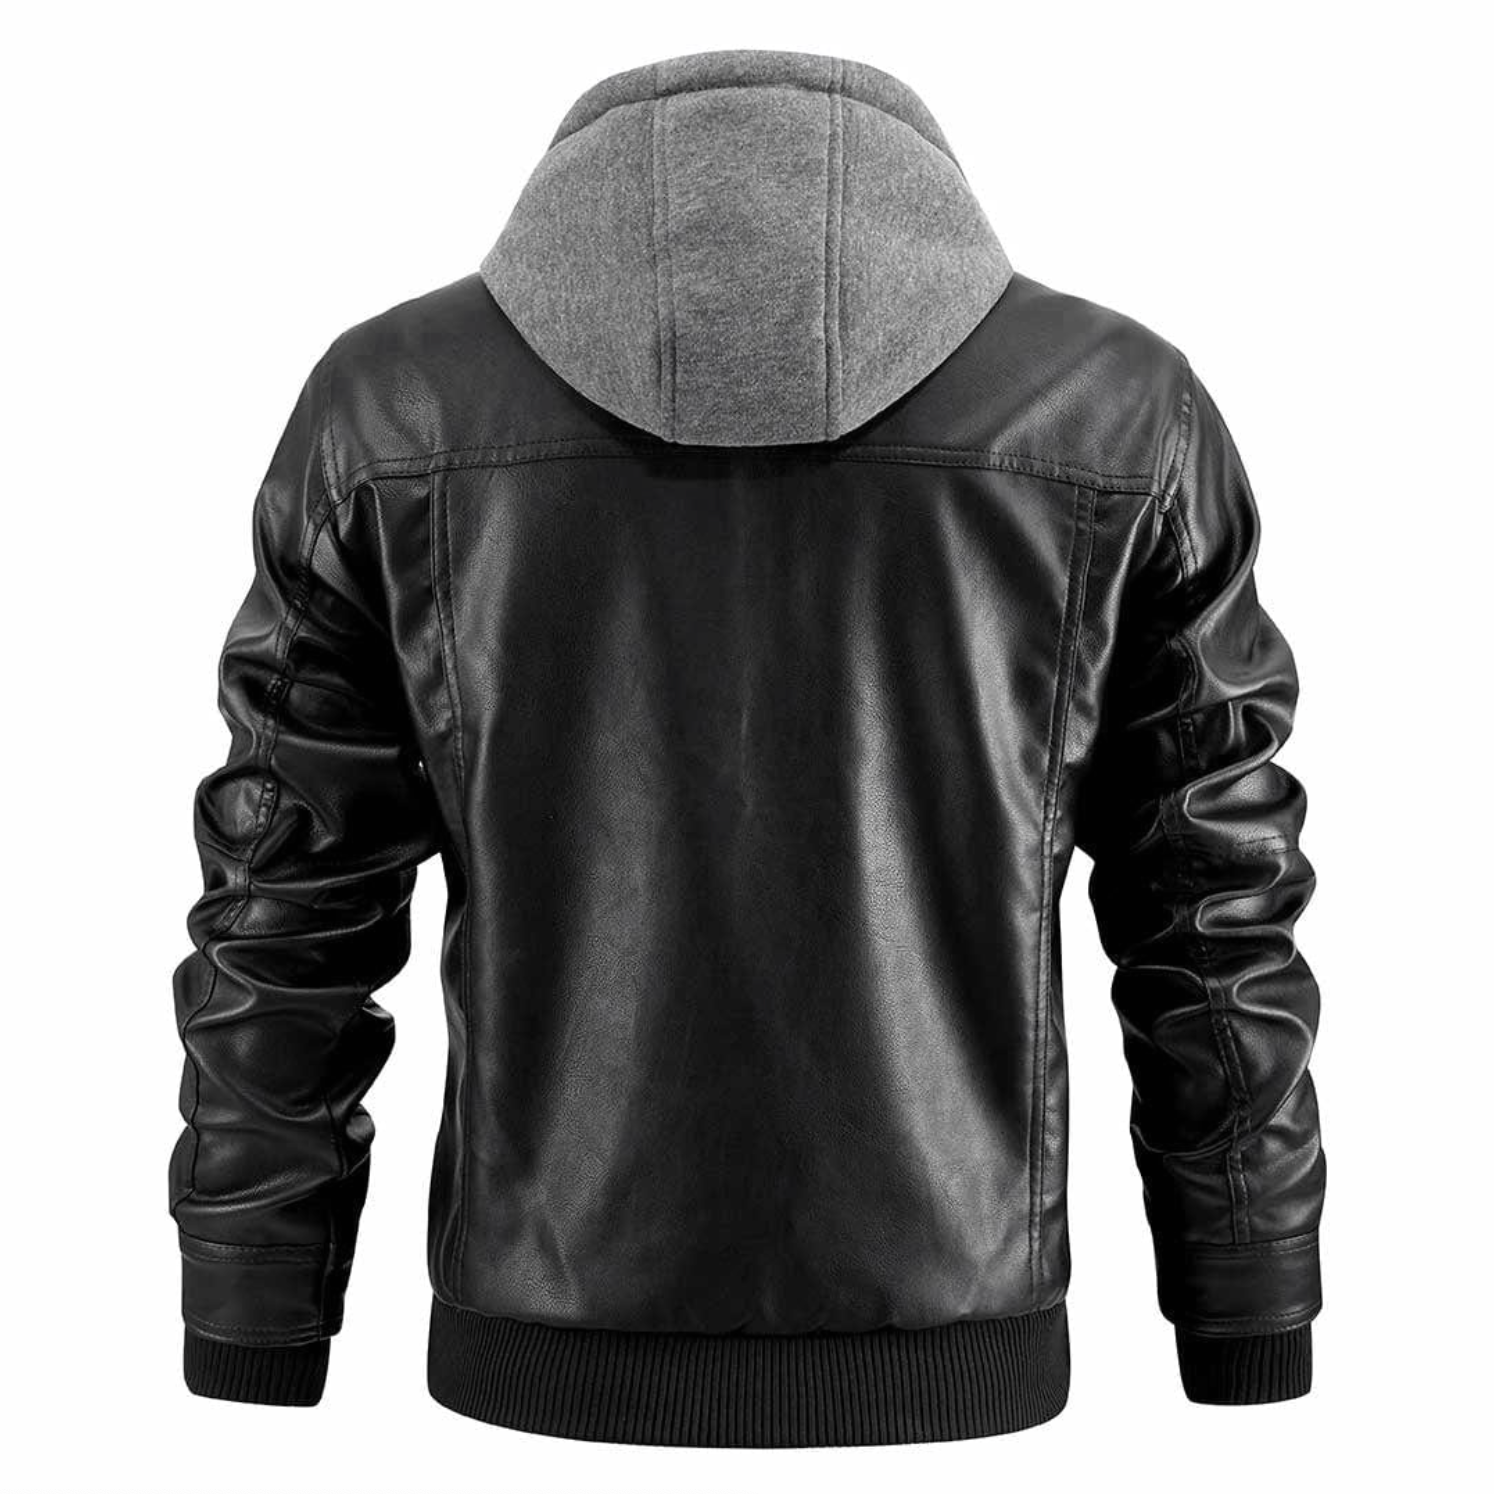 RECON RENEGADE LEGACY LEATHER JACKET